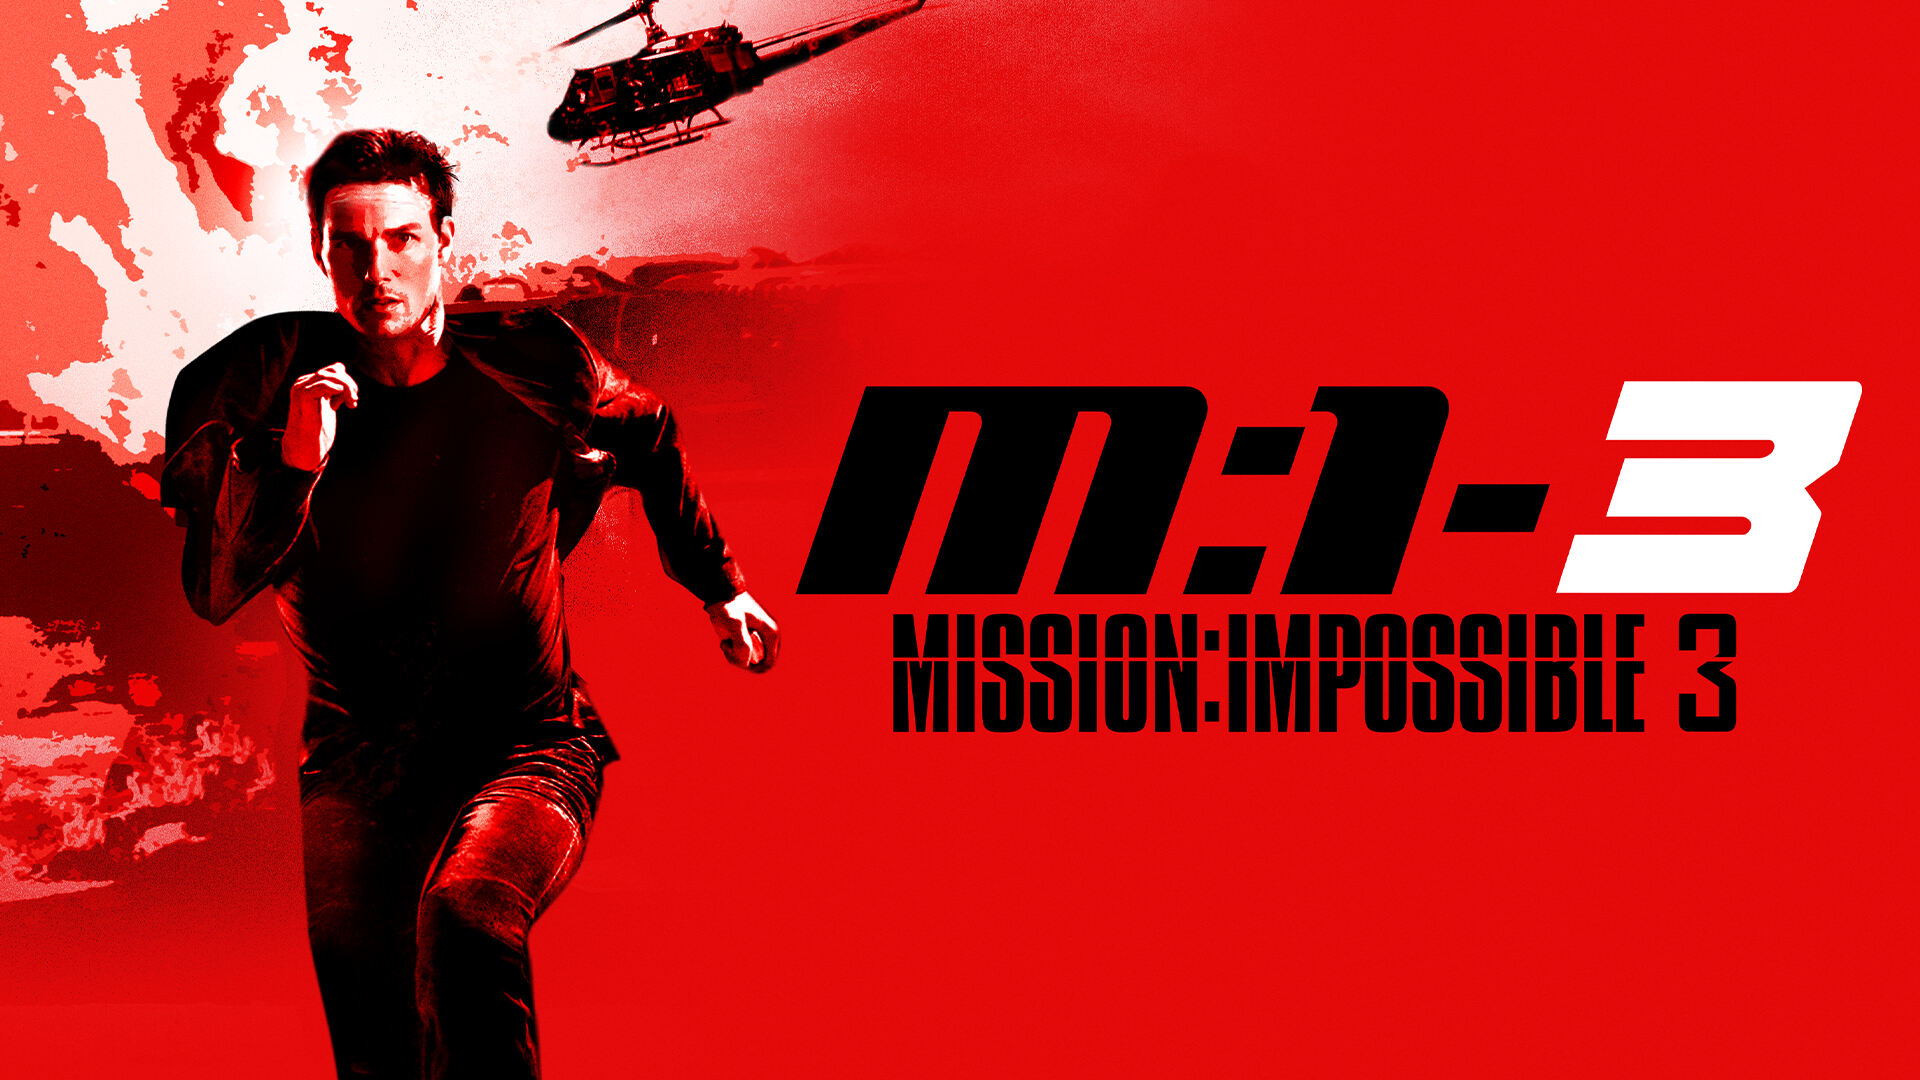 49 Facts about the movie Mission: Impossible III - Facts.net